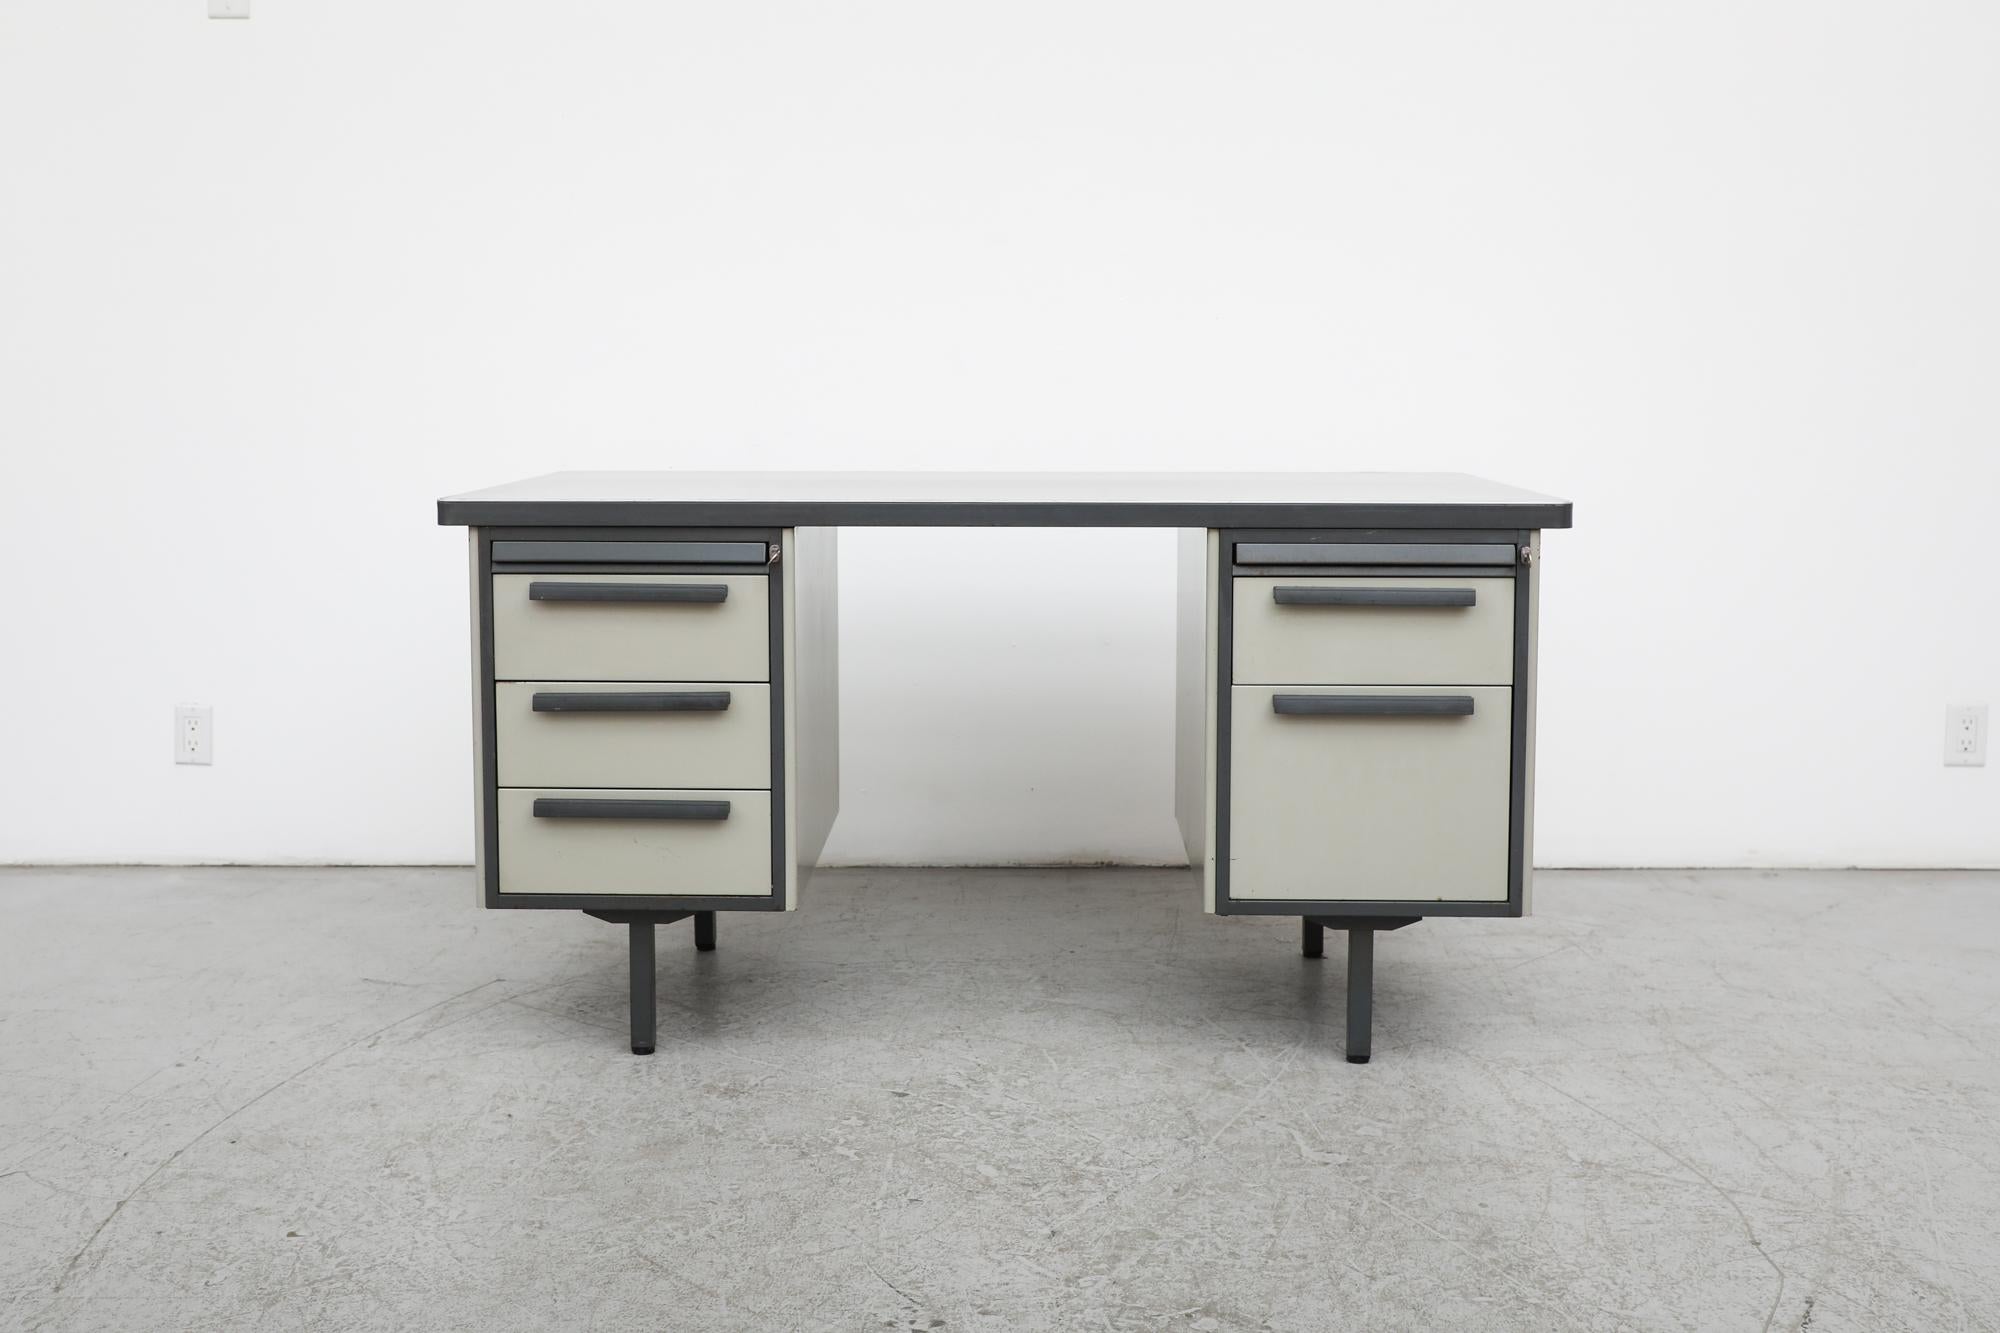 Mid-Century, Strafor manufactured desk from the Netherlands, 1960s. The desk's frame has cabinets on both sides with a file drawer on the right hand side. Outfitted with a linoleum top. In original condition with visible wear consistent with its age